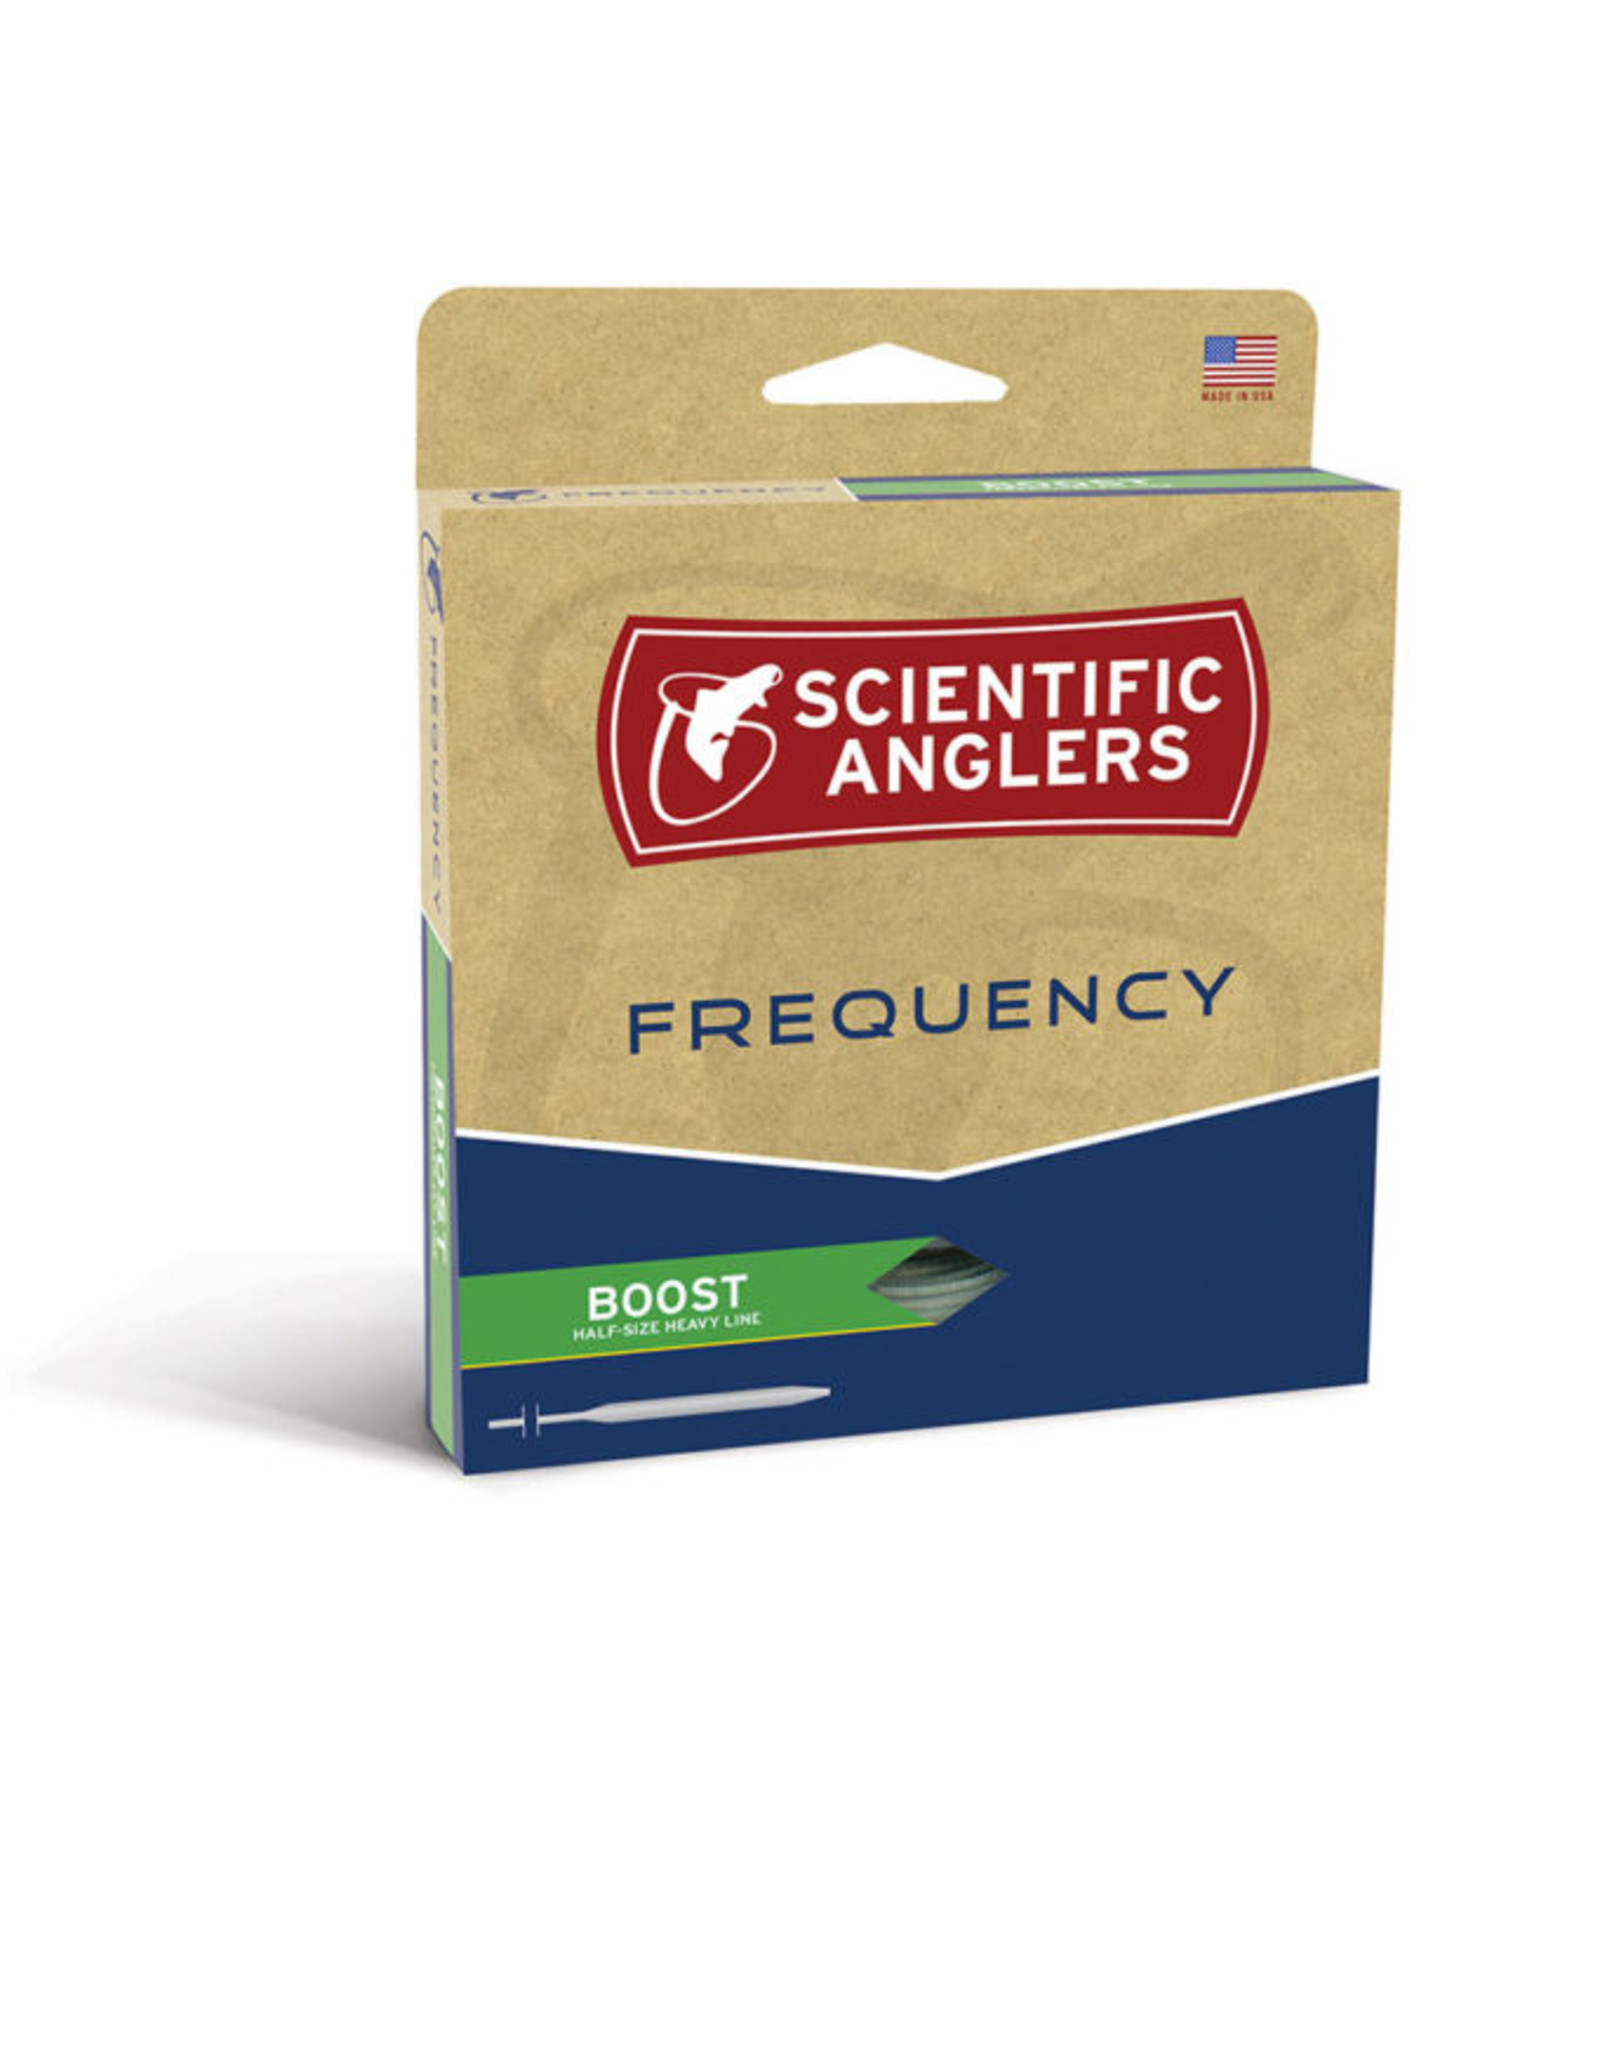 Scientific Anglers Scientific Anglers - Frequency Boost Fly Line (SALE)